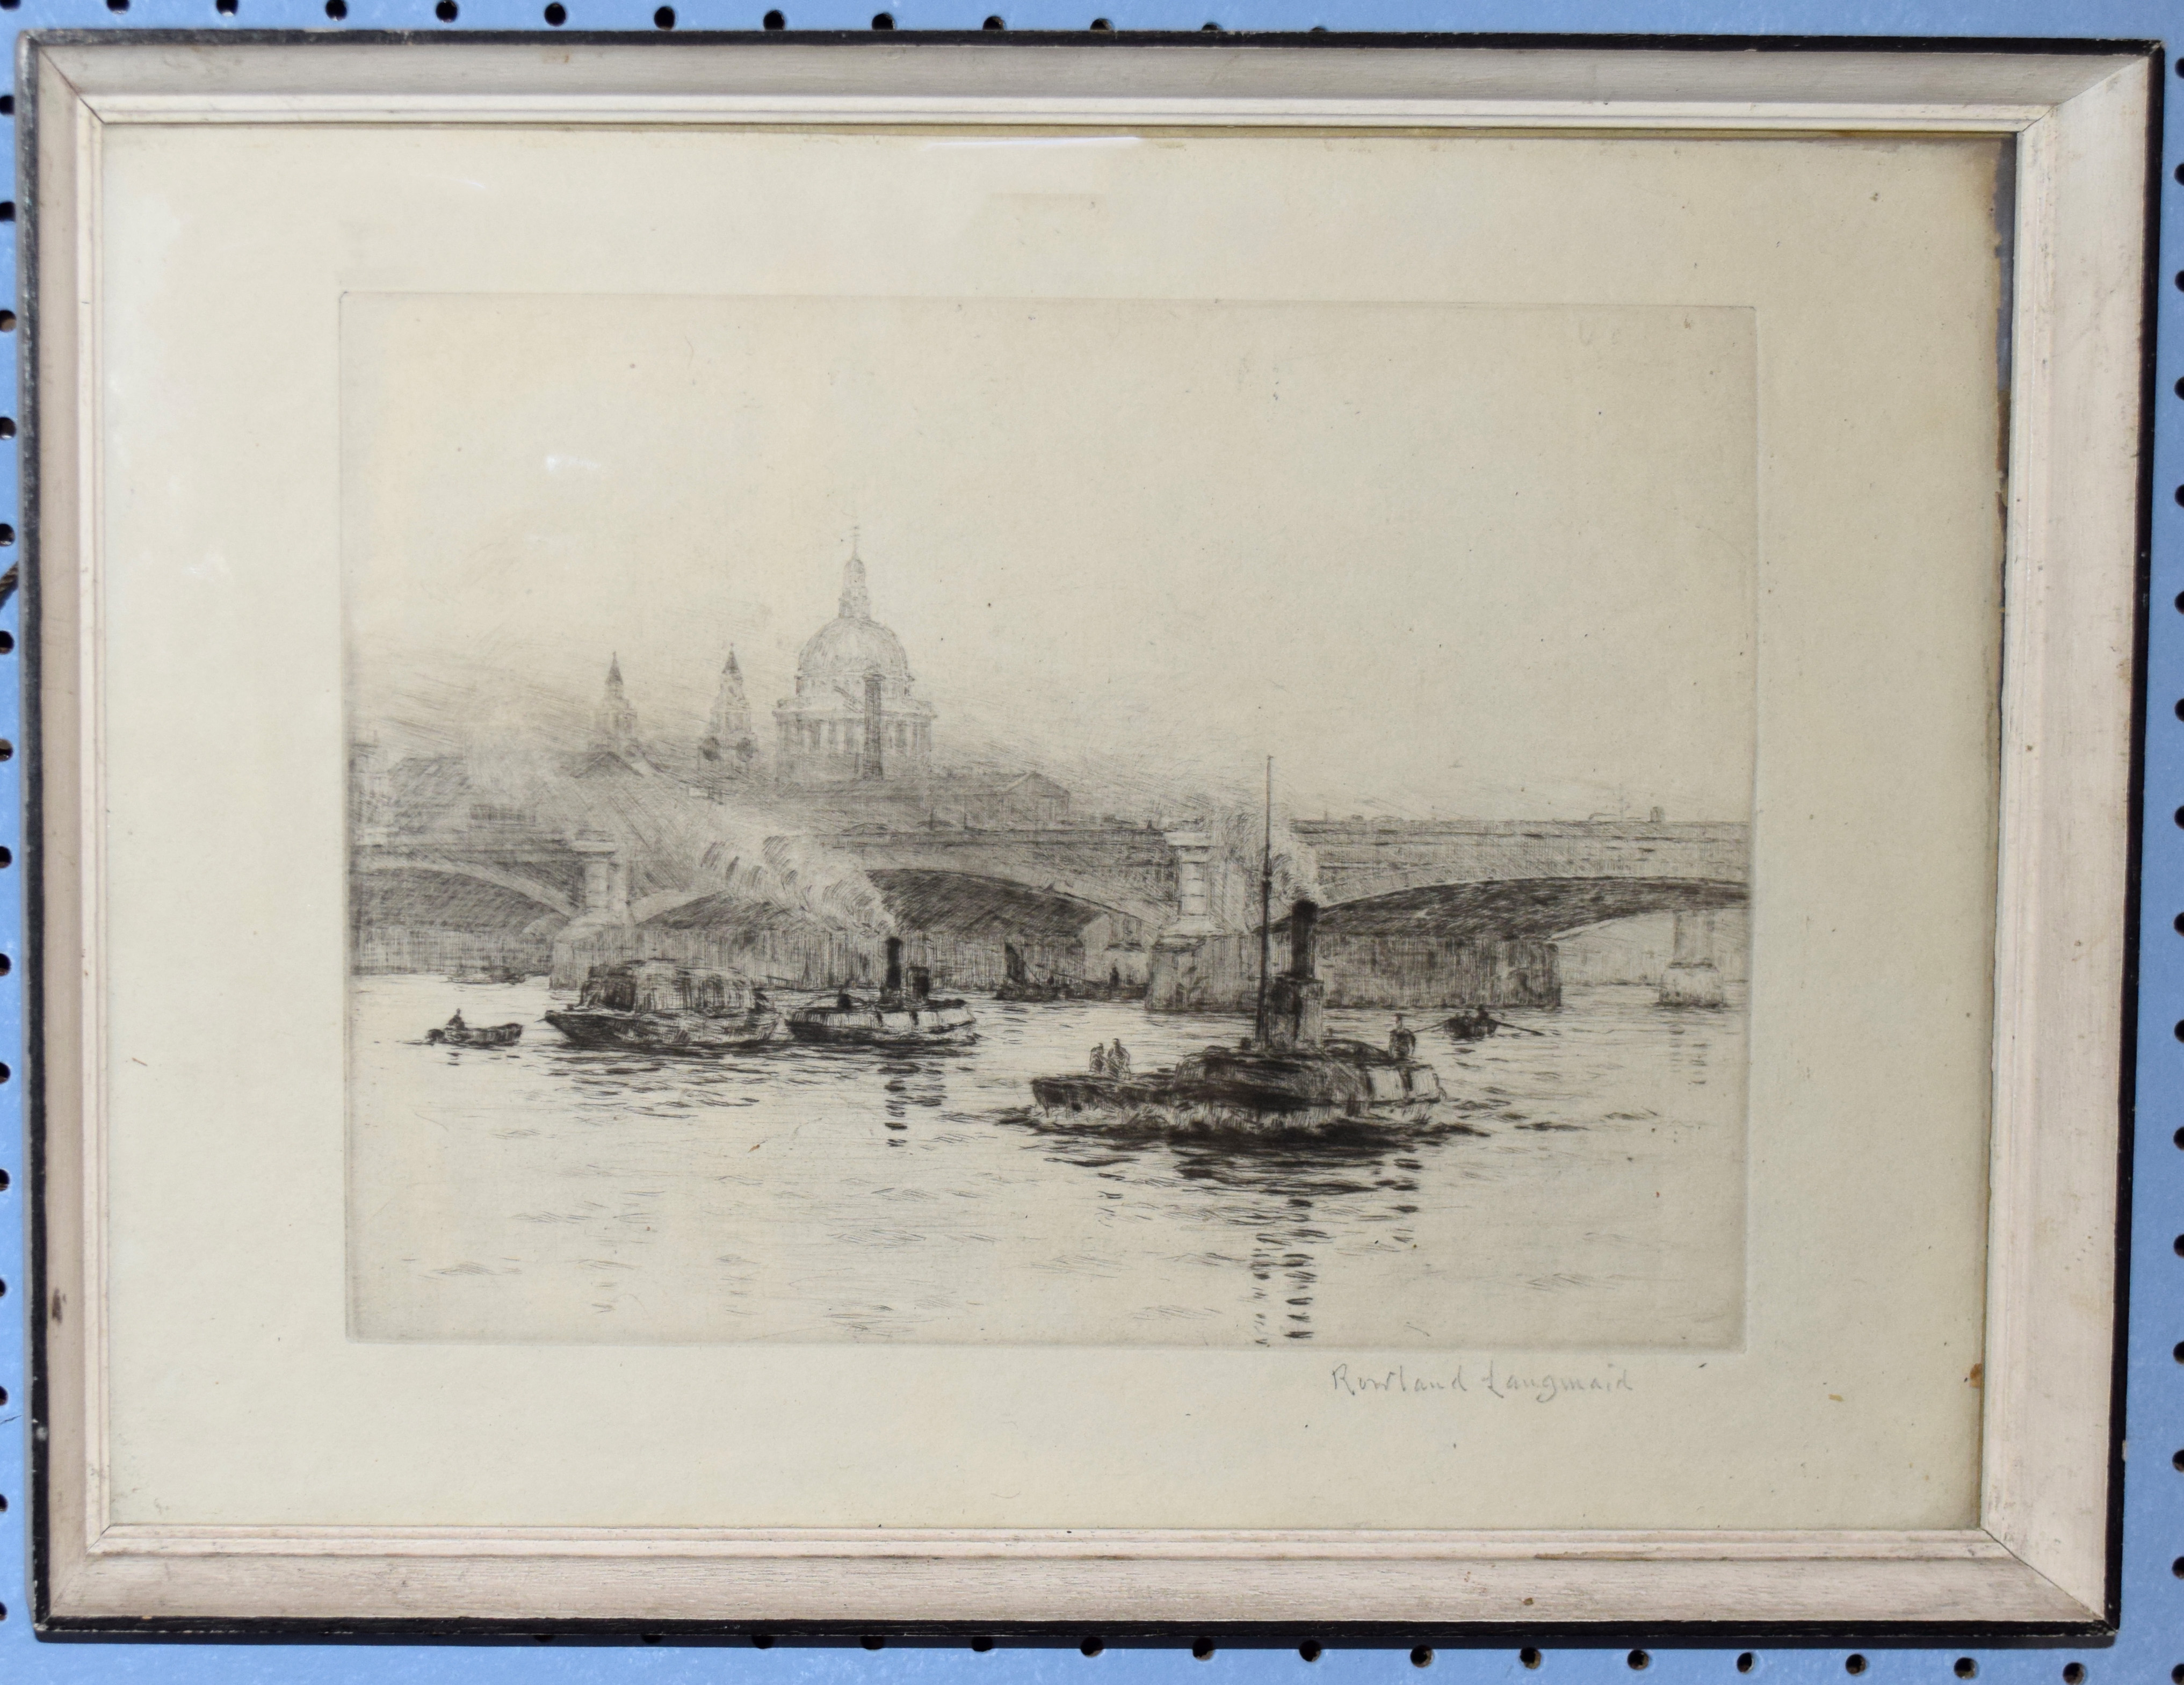 Rowland Langmaid, London Bridge with St Paul's, black and white etching, signed in pencil to lower